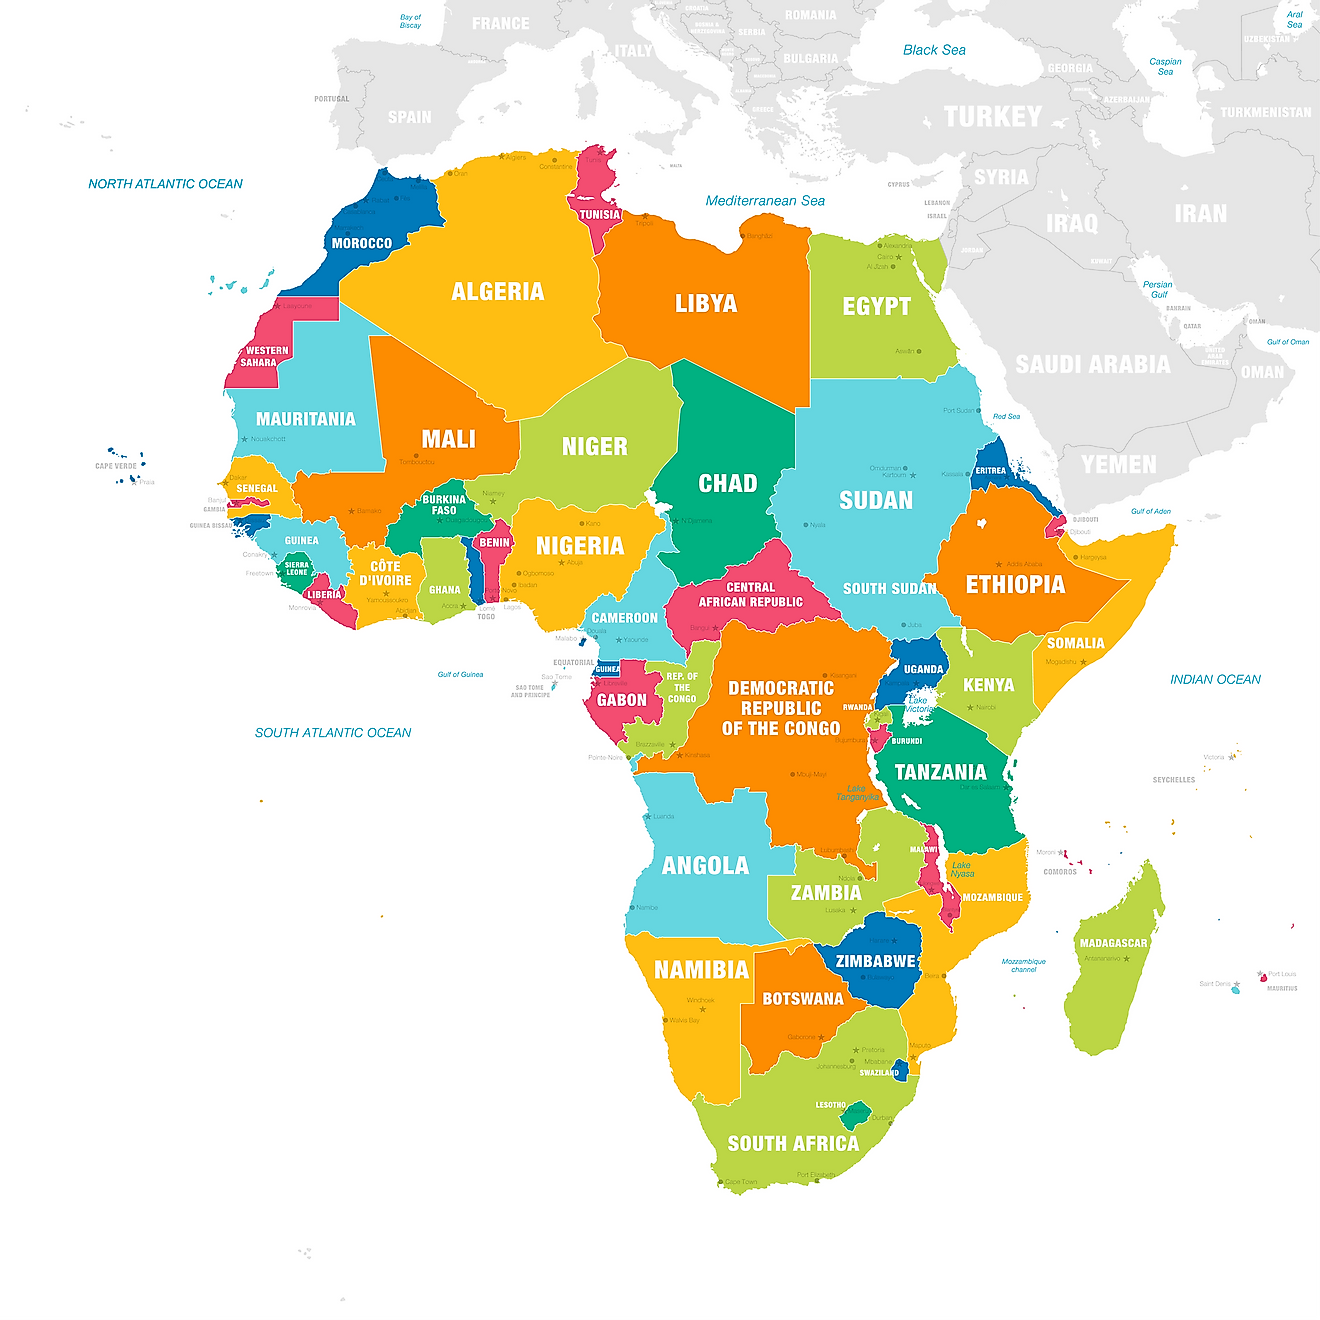 Map of Africa showing the continent's 54 countries.